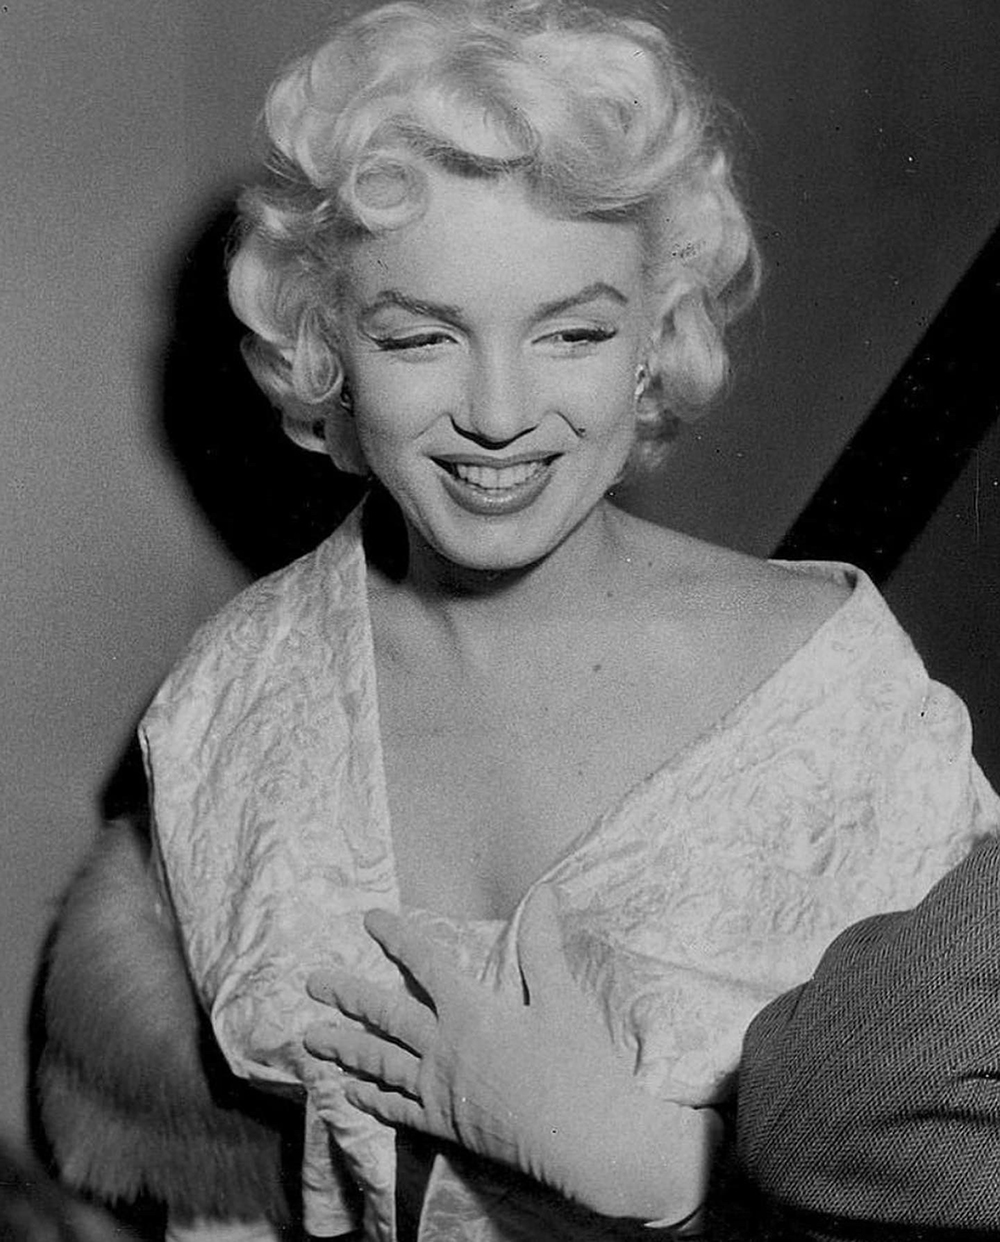 Marilyn Monroe's Rare Personal Belongings Going Up For Auction